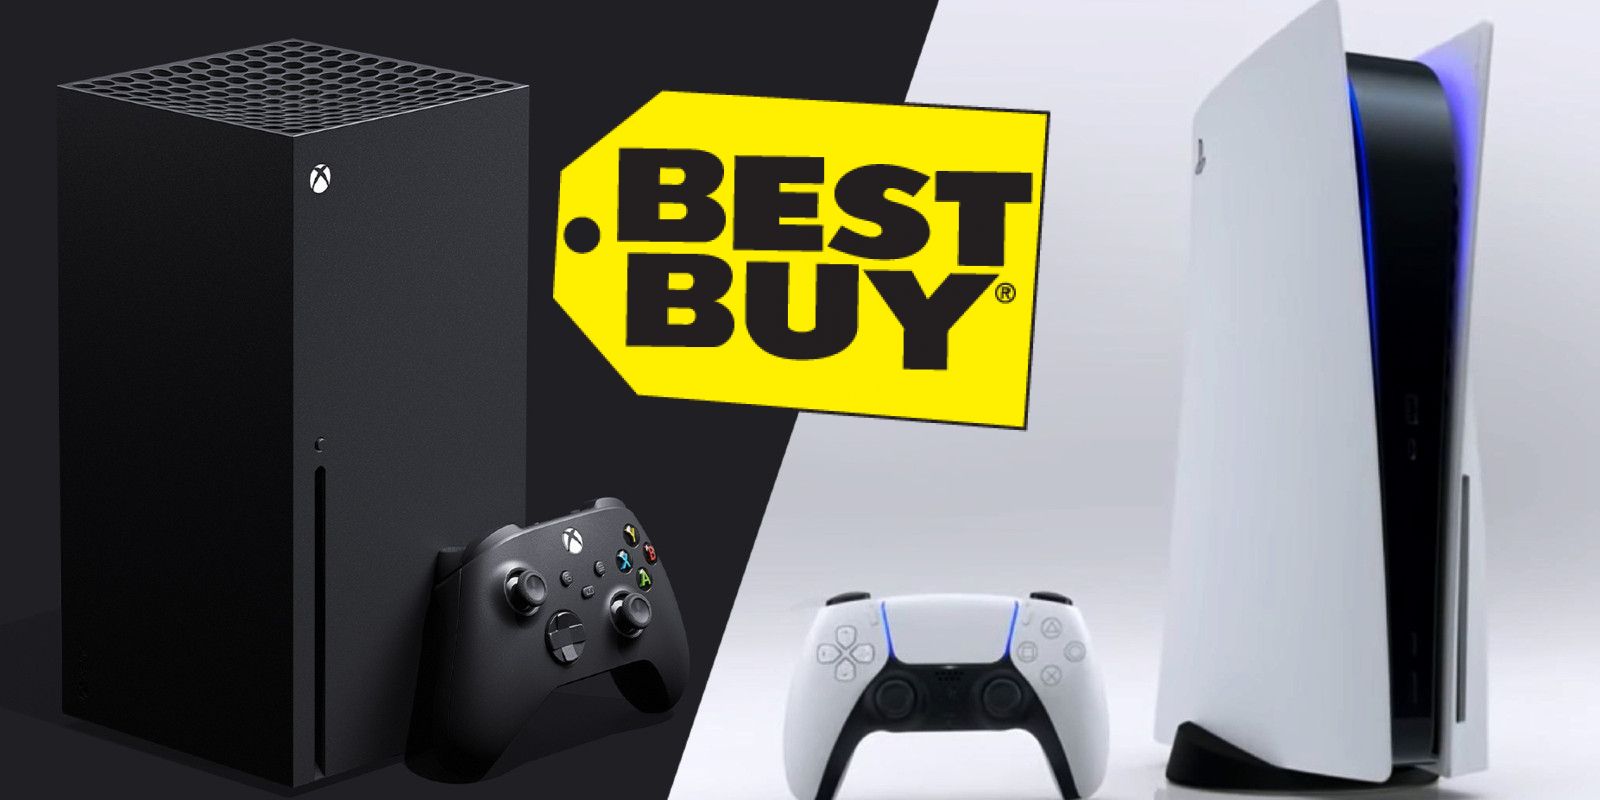 PlayStation 5 and Xbox Series X next-gen consoles with Best Buy logo.